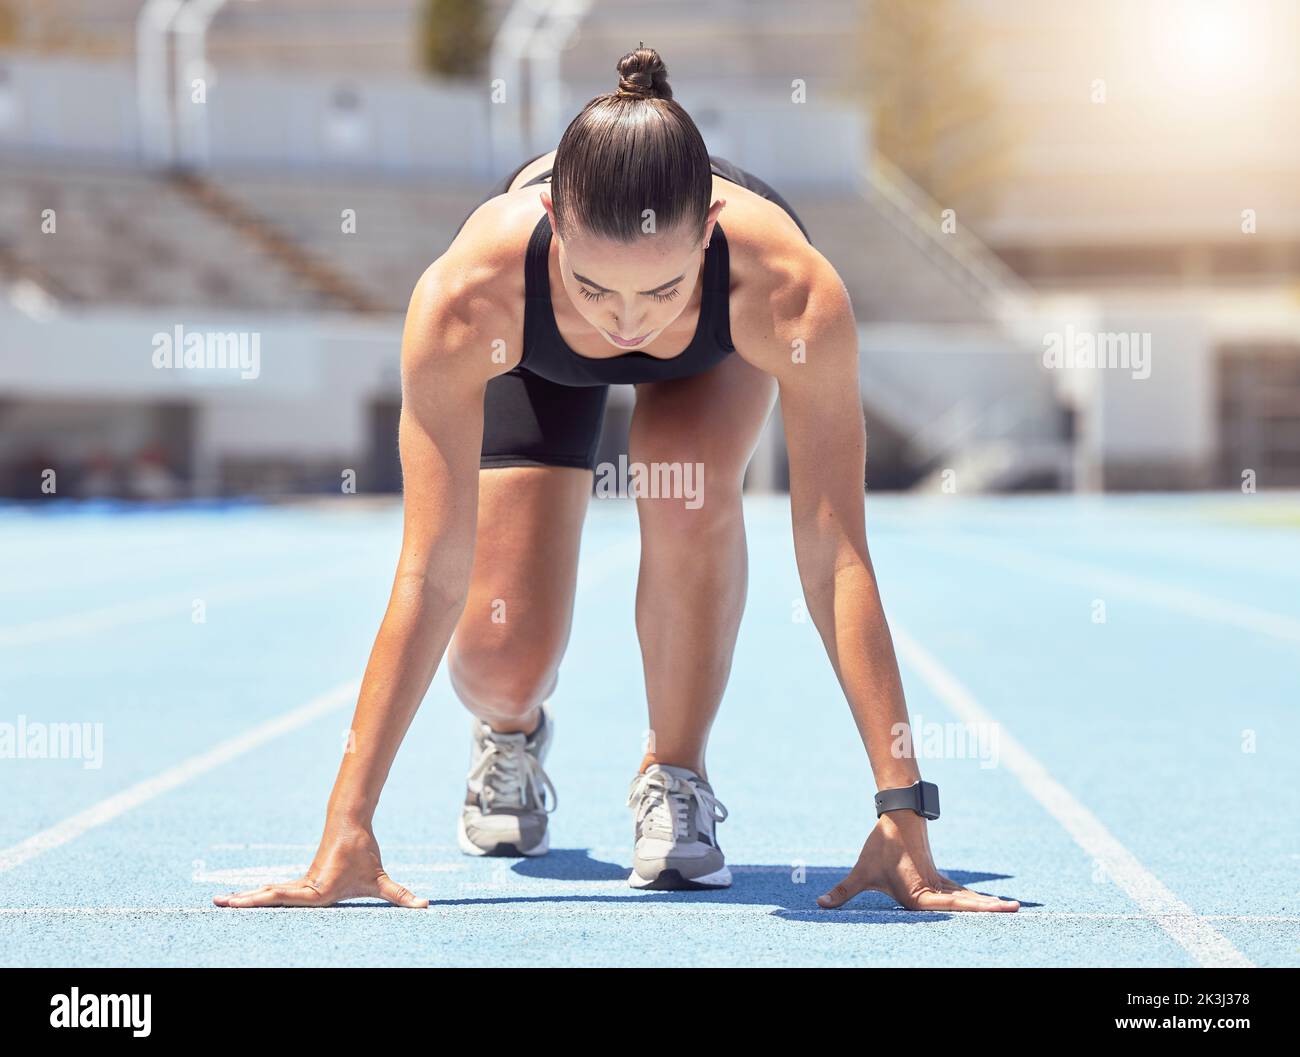 Motivation, energy and runner start training at outdoor track, ready to practice go. Health, power and fitness goal by professional woman athlete with Stock Photo